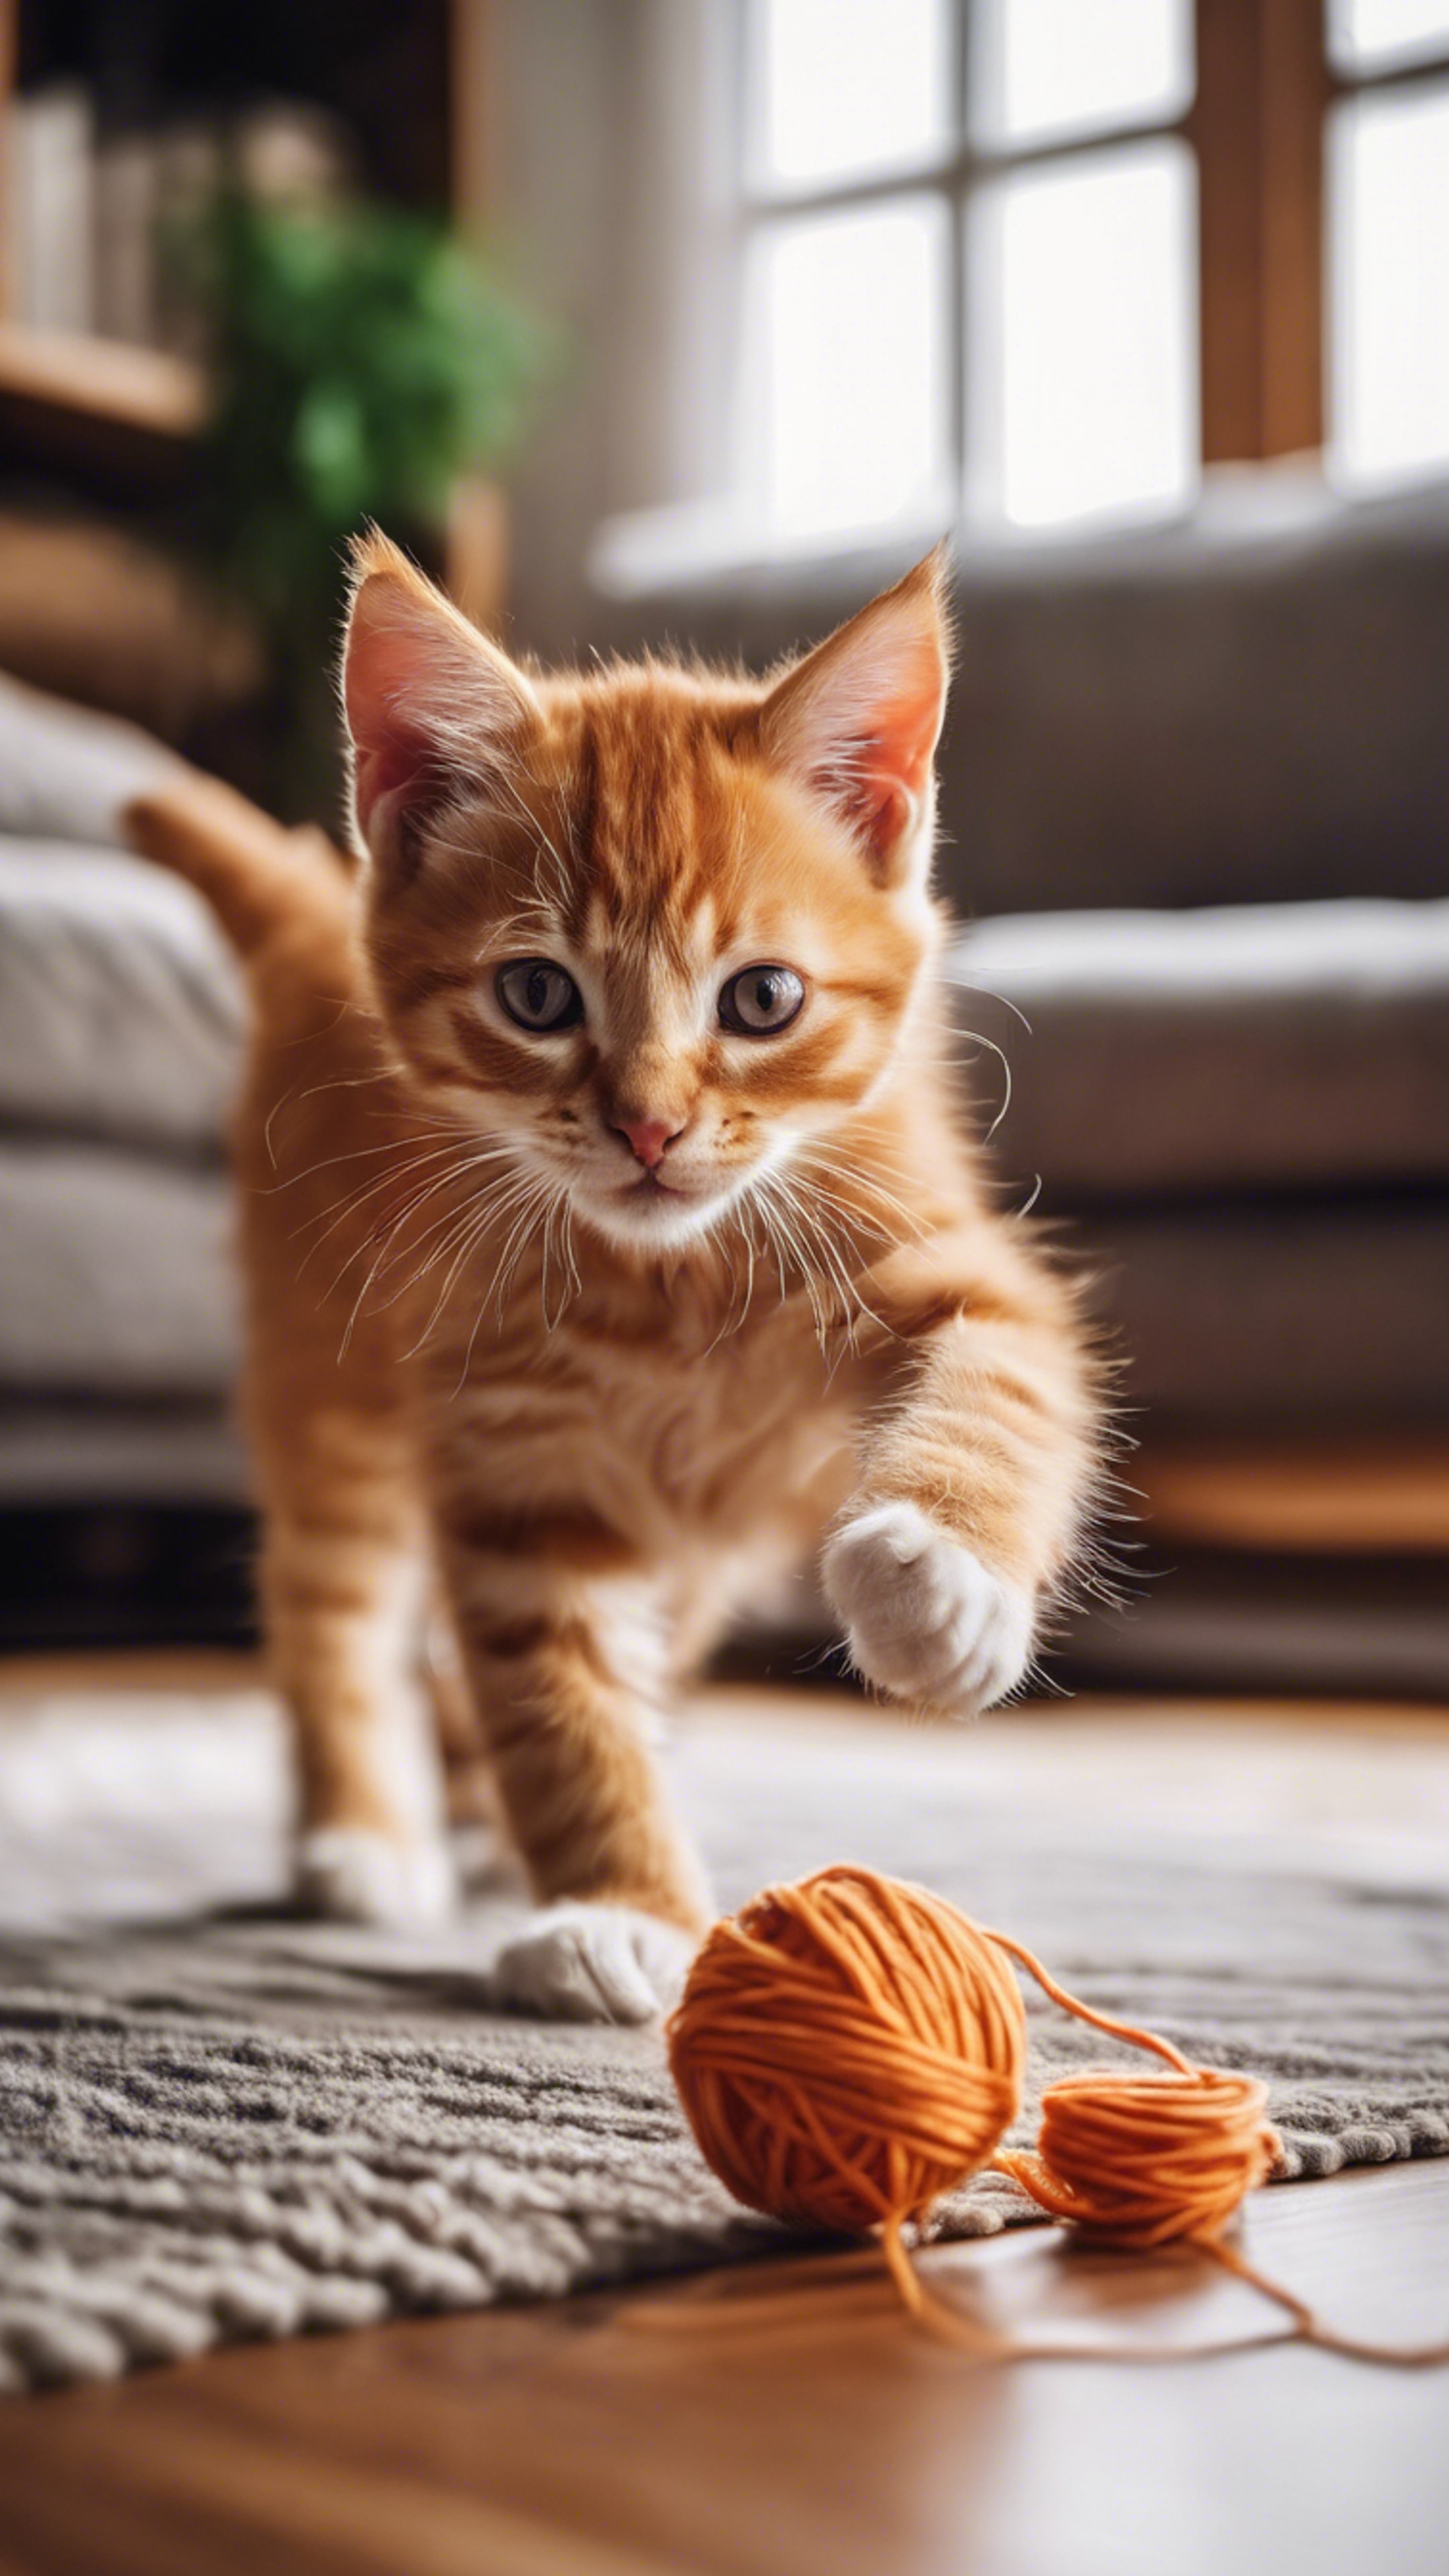 A playful orange tabby kitten, chasing a ball of yarn in a cozy wooden living room. Behang[48ba56b3f1554d3caaed]